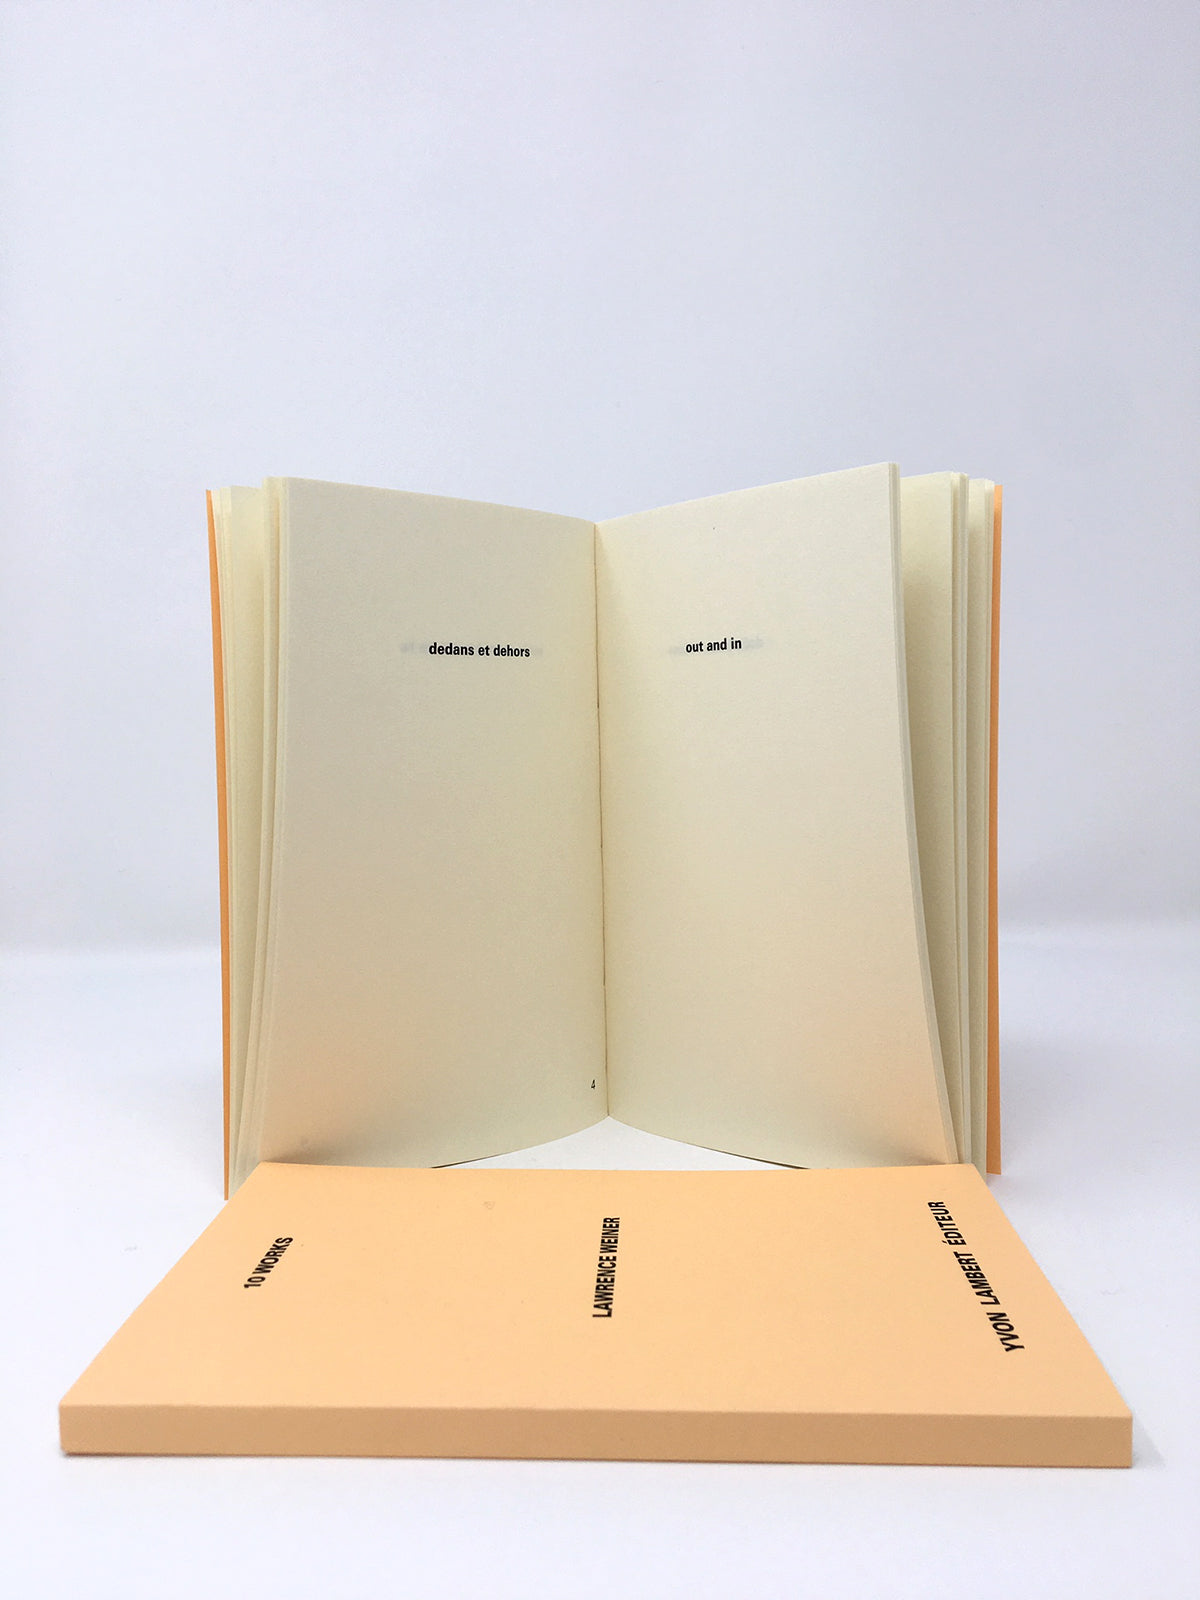 Lawrence Weiner - 10 Works (reprint 2019)